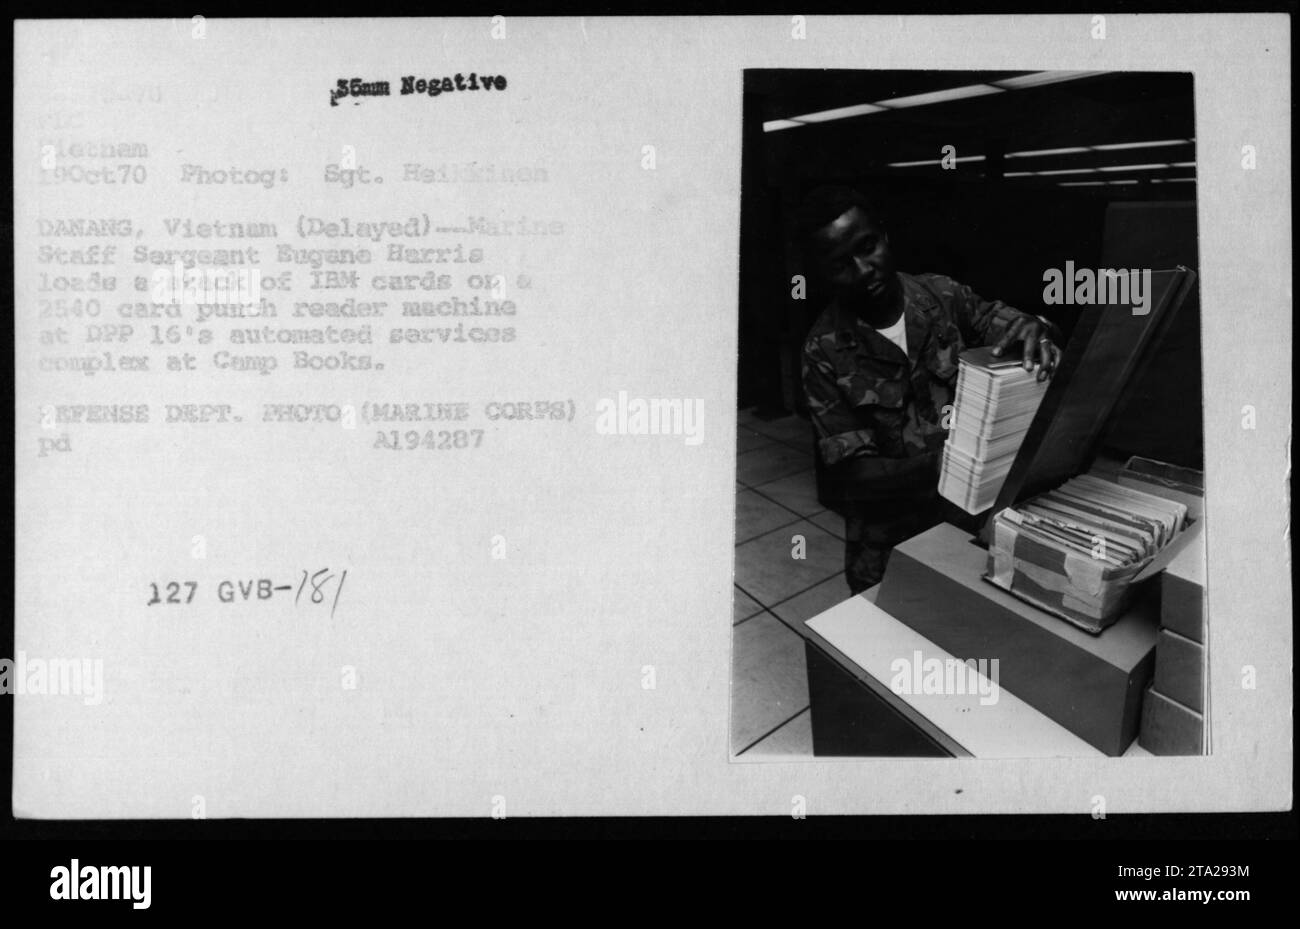 Marine Staff Sergeant Bugane Harris is seen in this photograph loading a stack of IBM cards onto a 2540 card punch reader machine at DPP 16's automated services complex at Camp Books in Danang, Vietnam. This image was taken on October 19, 1970, and was part of the data processing operations conducted by the American military during the Vietnam War. Stock Photo